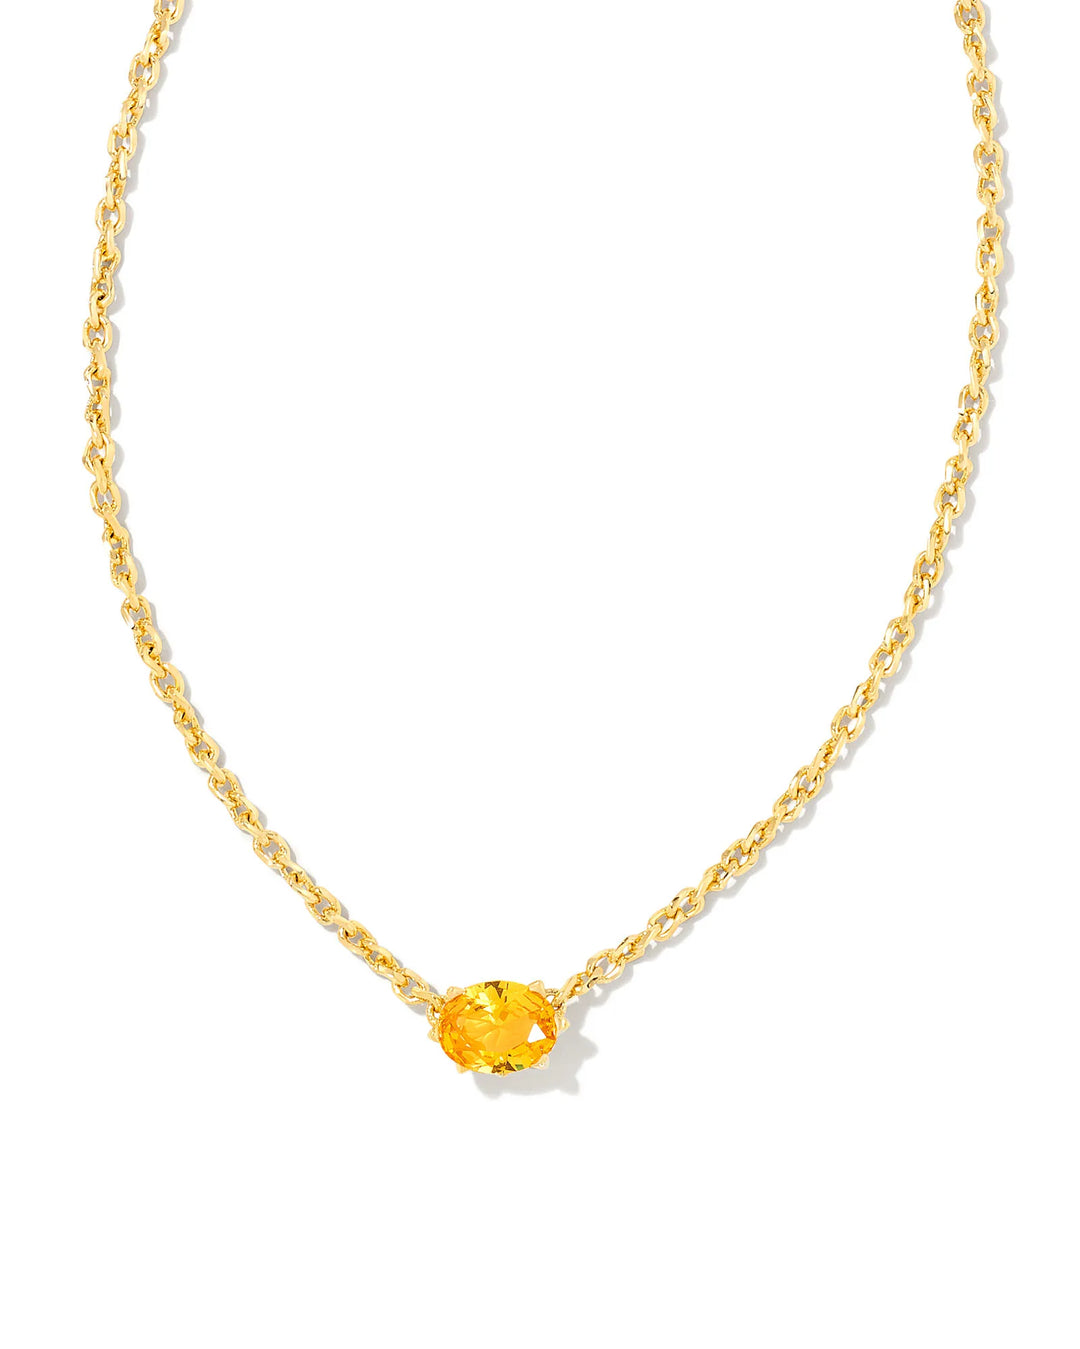 CAILIN CRYSTAL PENDANT NECKLACE - GOLD YELLOW CRYSTAL